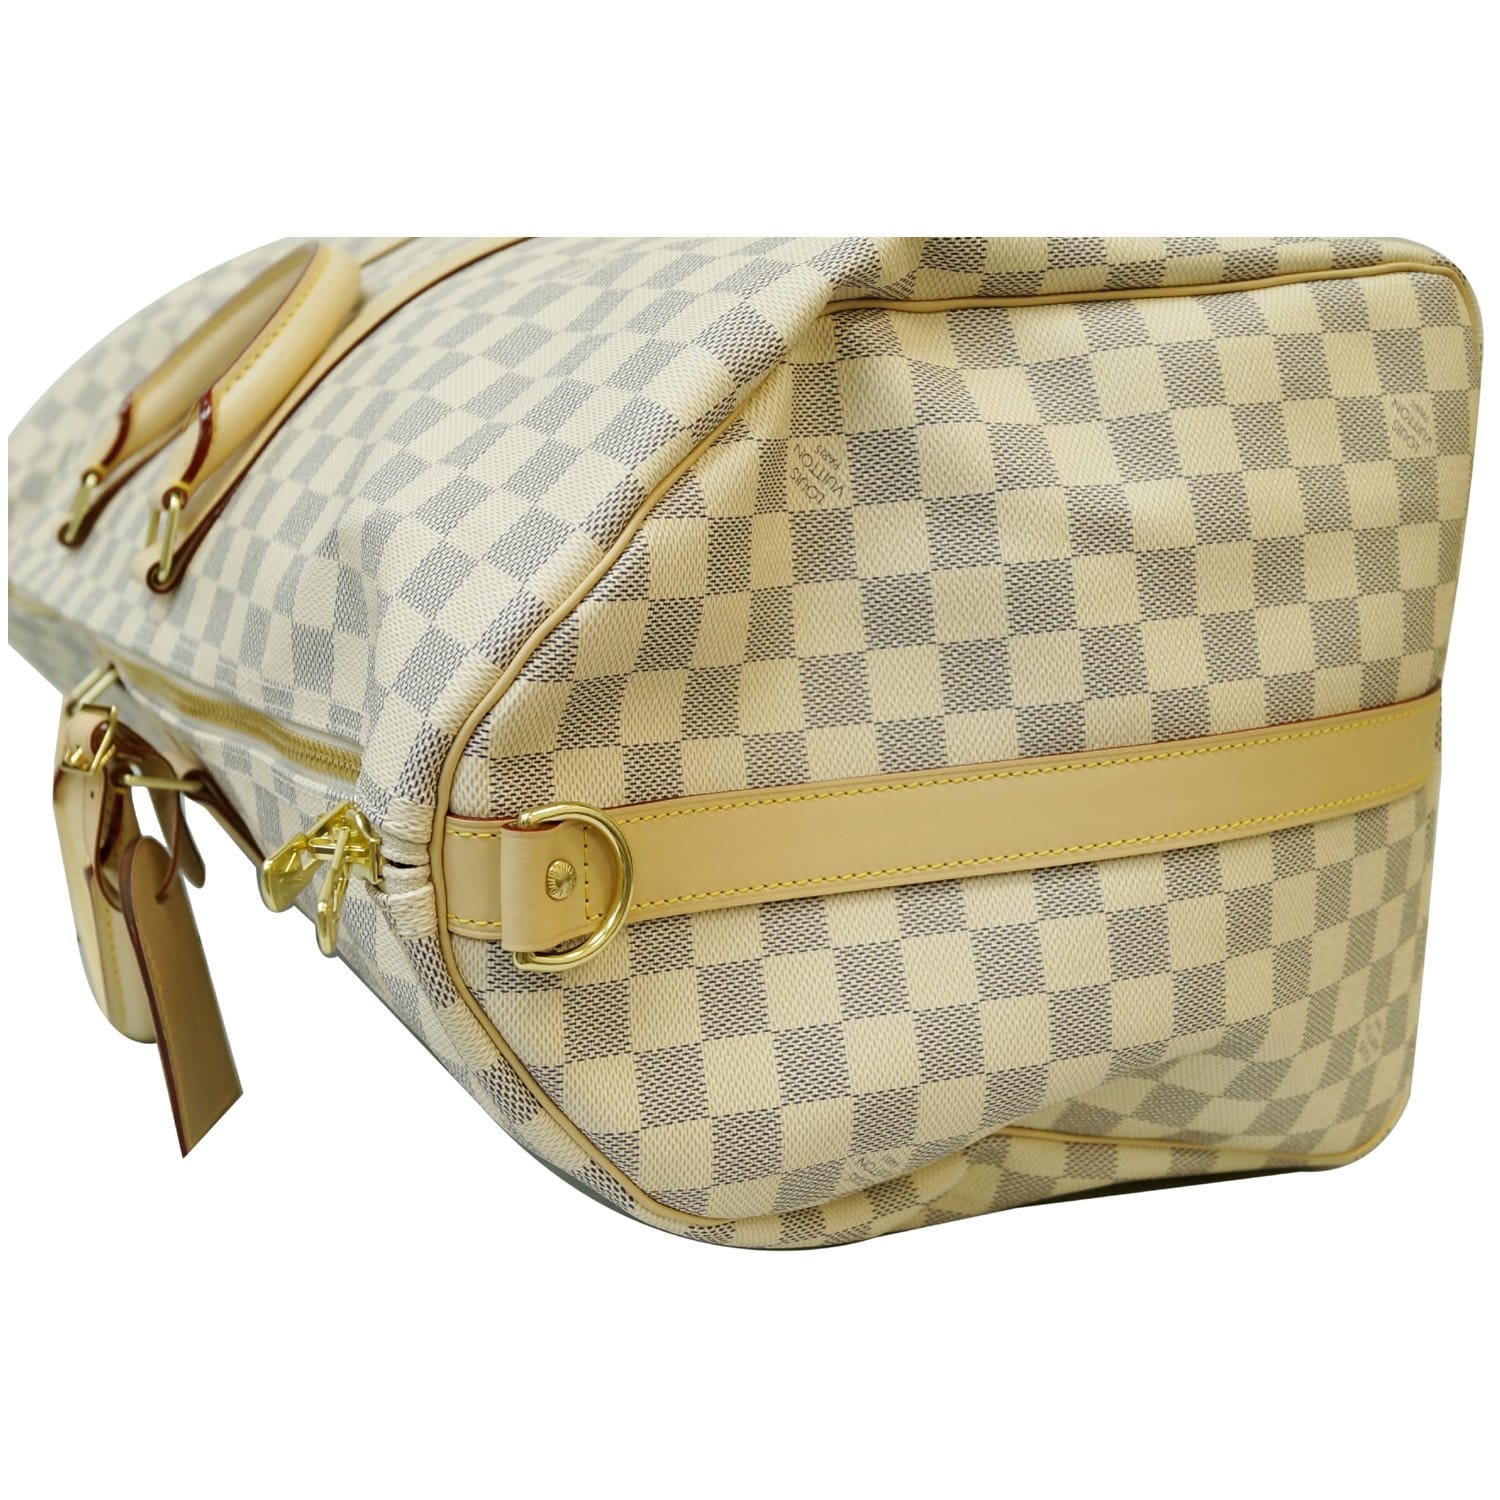 Louis Vuitton Damier Azur Keepall 55. DC: DU1141. Made in France. With long  strap & bag tag ❤️